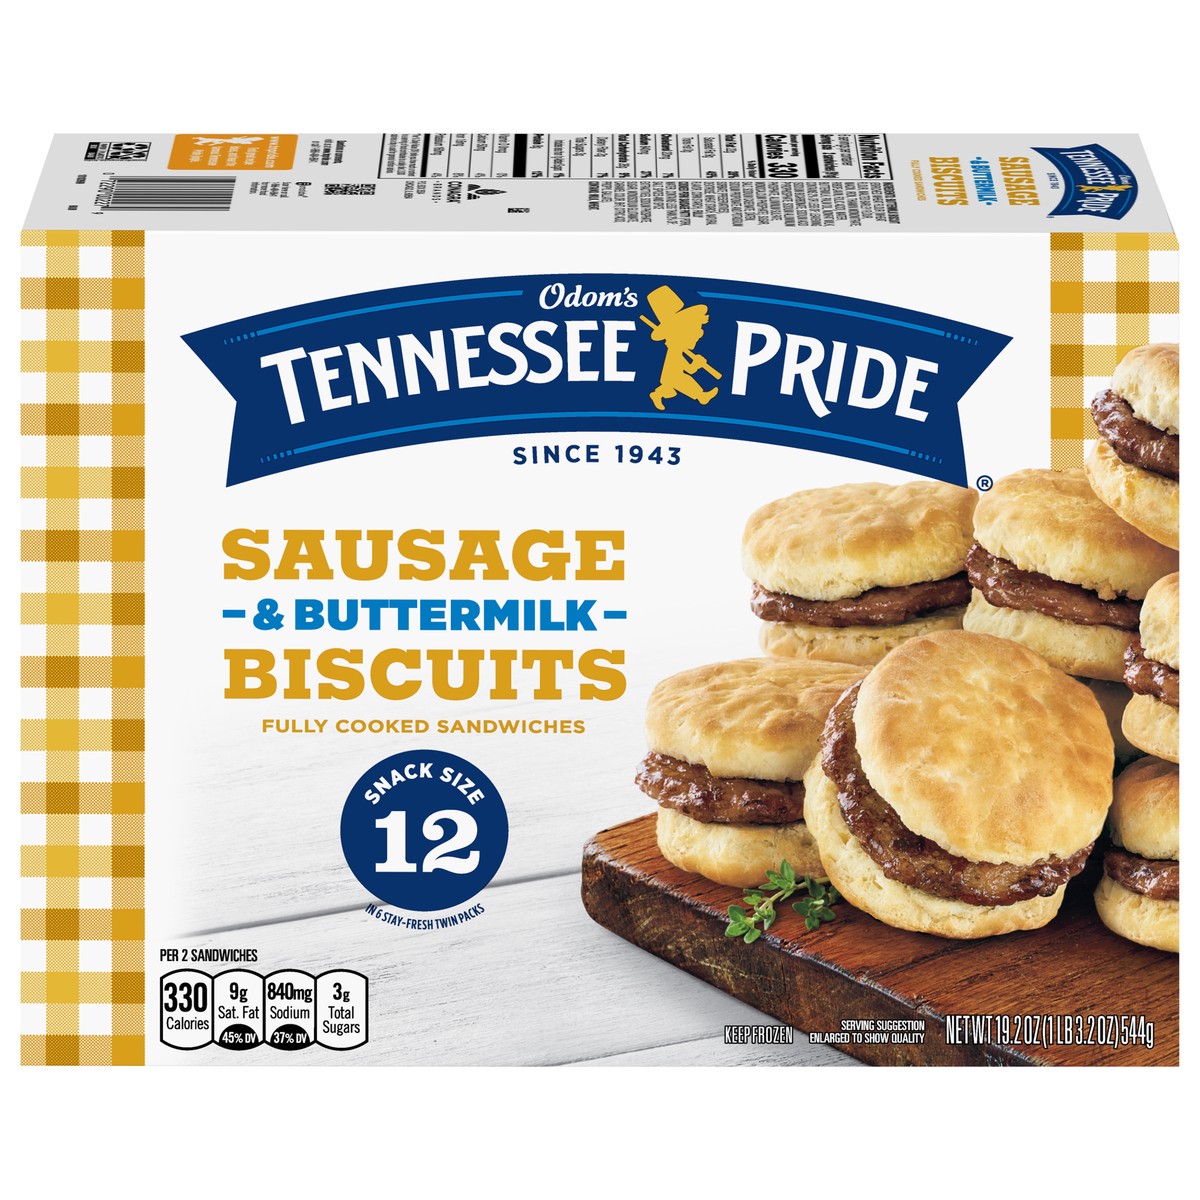 slide 1 of 5, Odom's Tennessee Pride Sausage & Buttermilk Biscuits Snack Size 12 ea, 12 ct